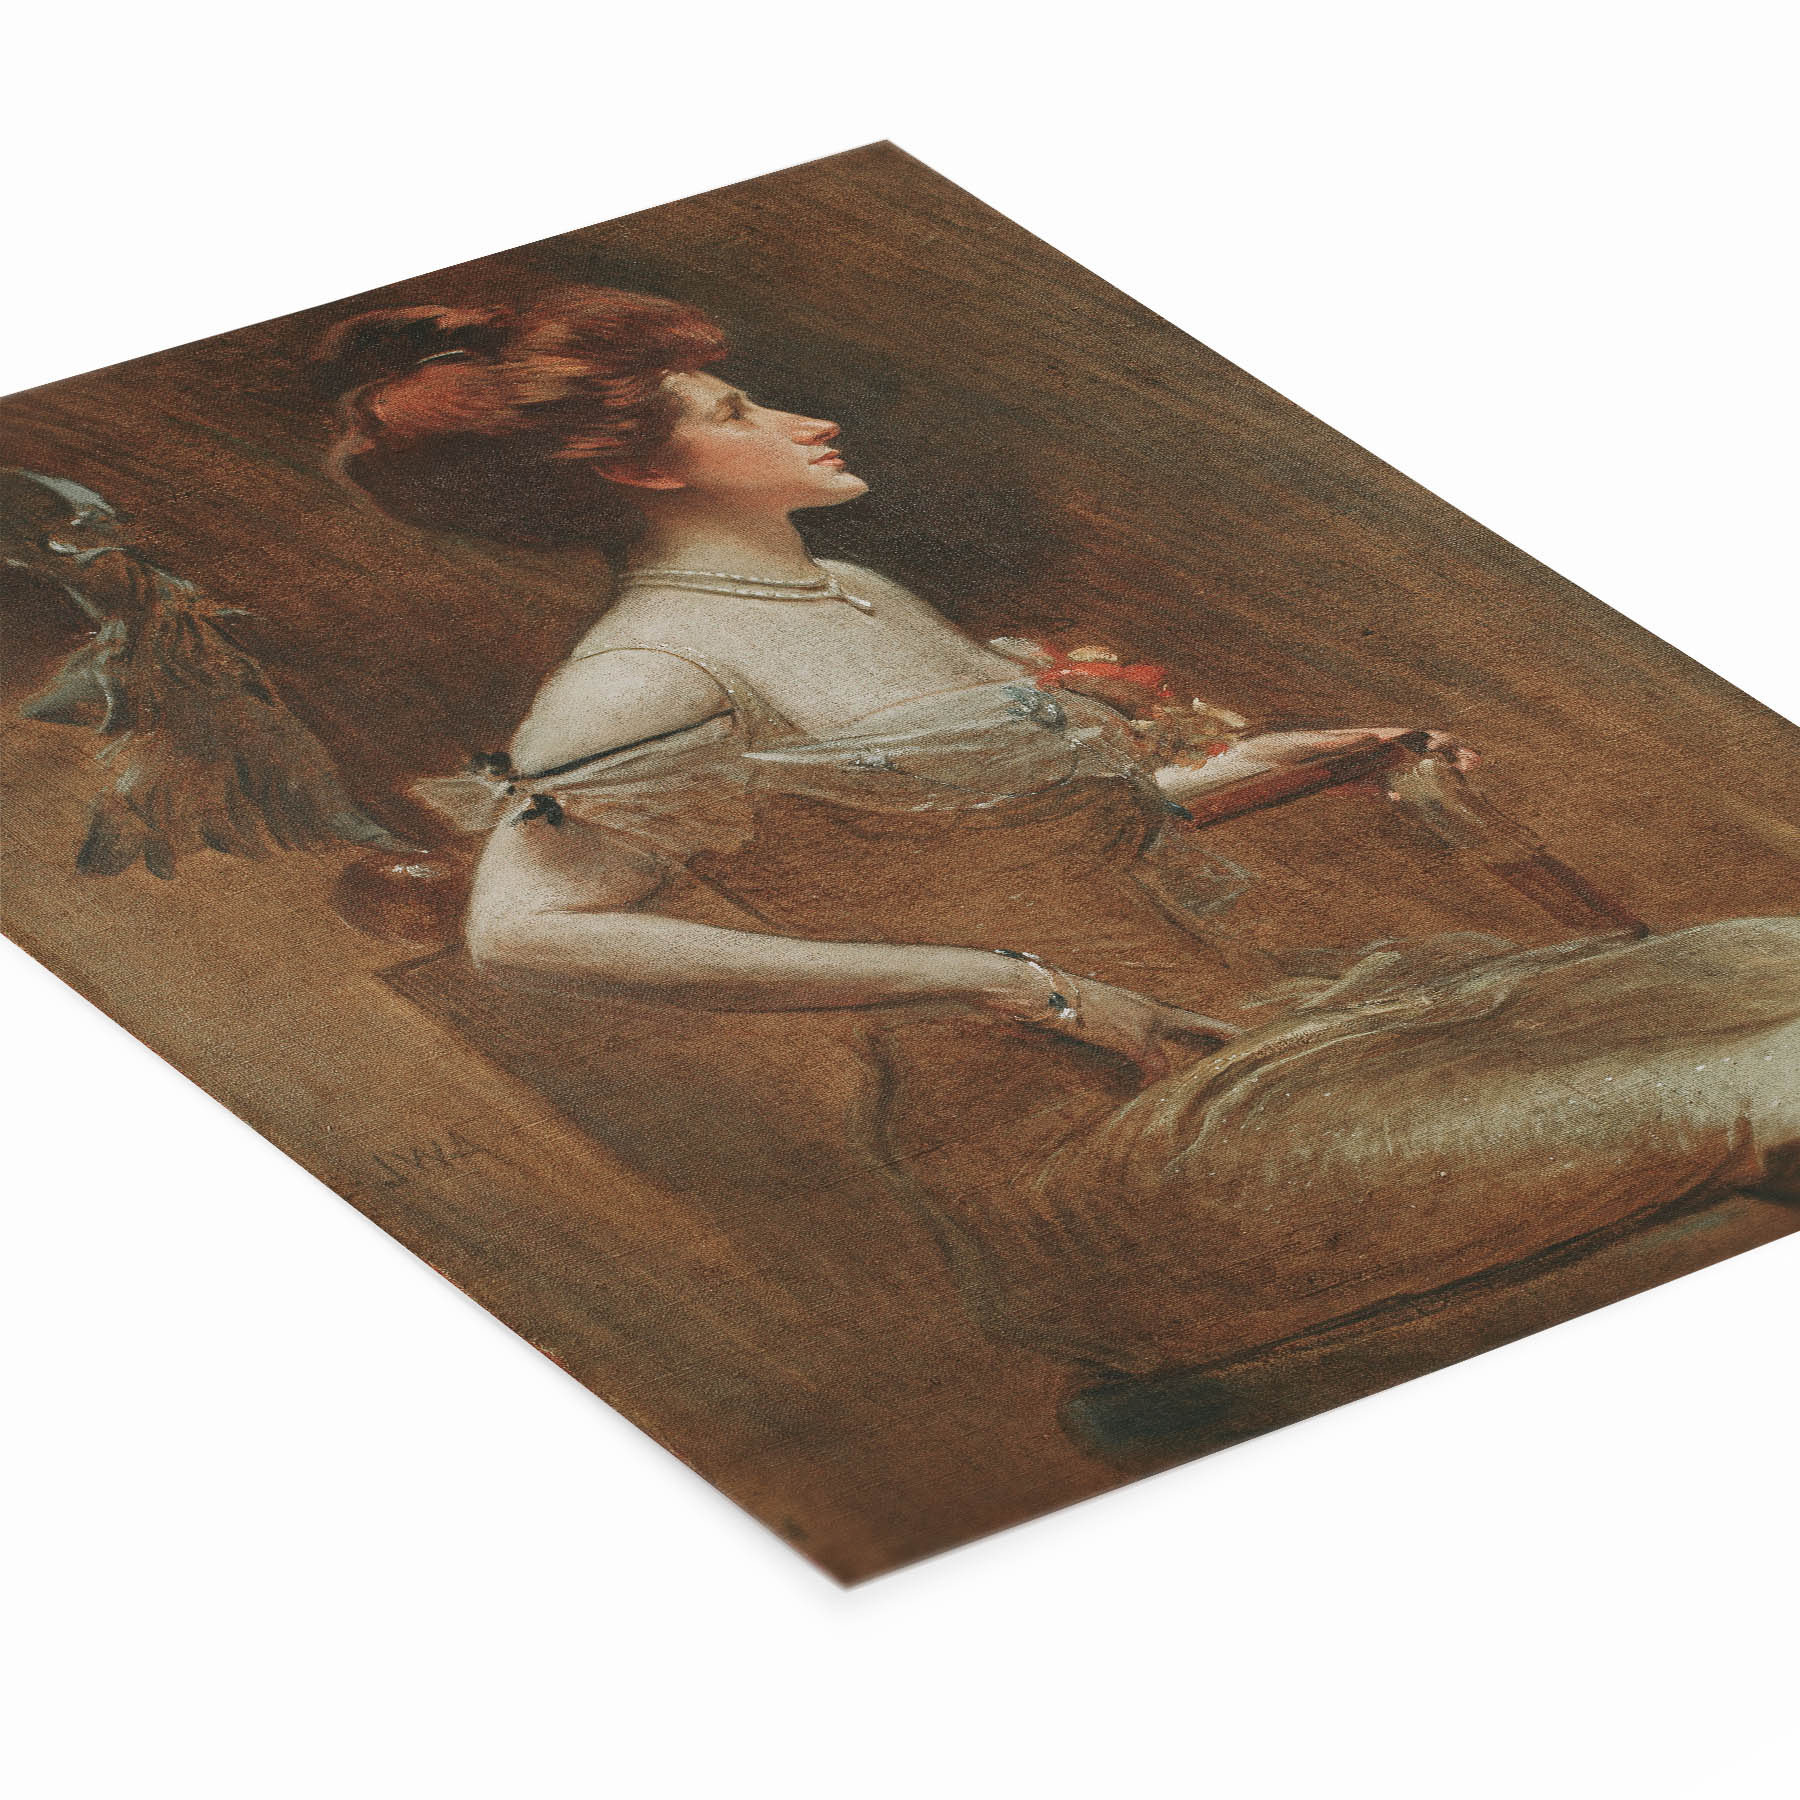 Woman in Tan Hues Painting Laying Flat on a White Background